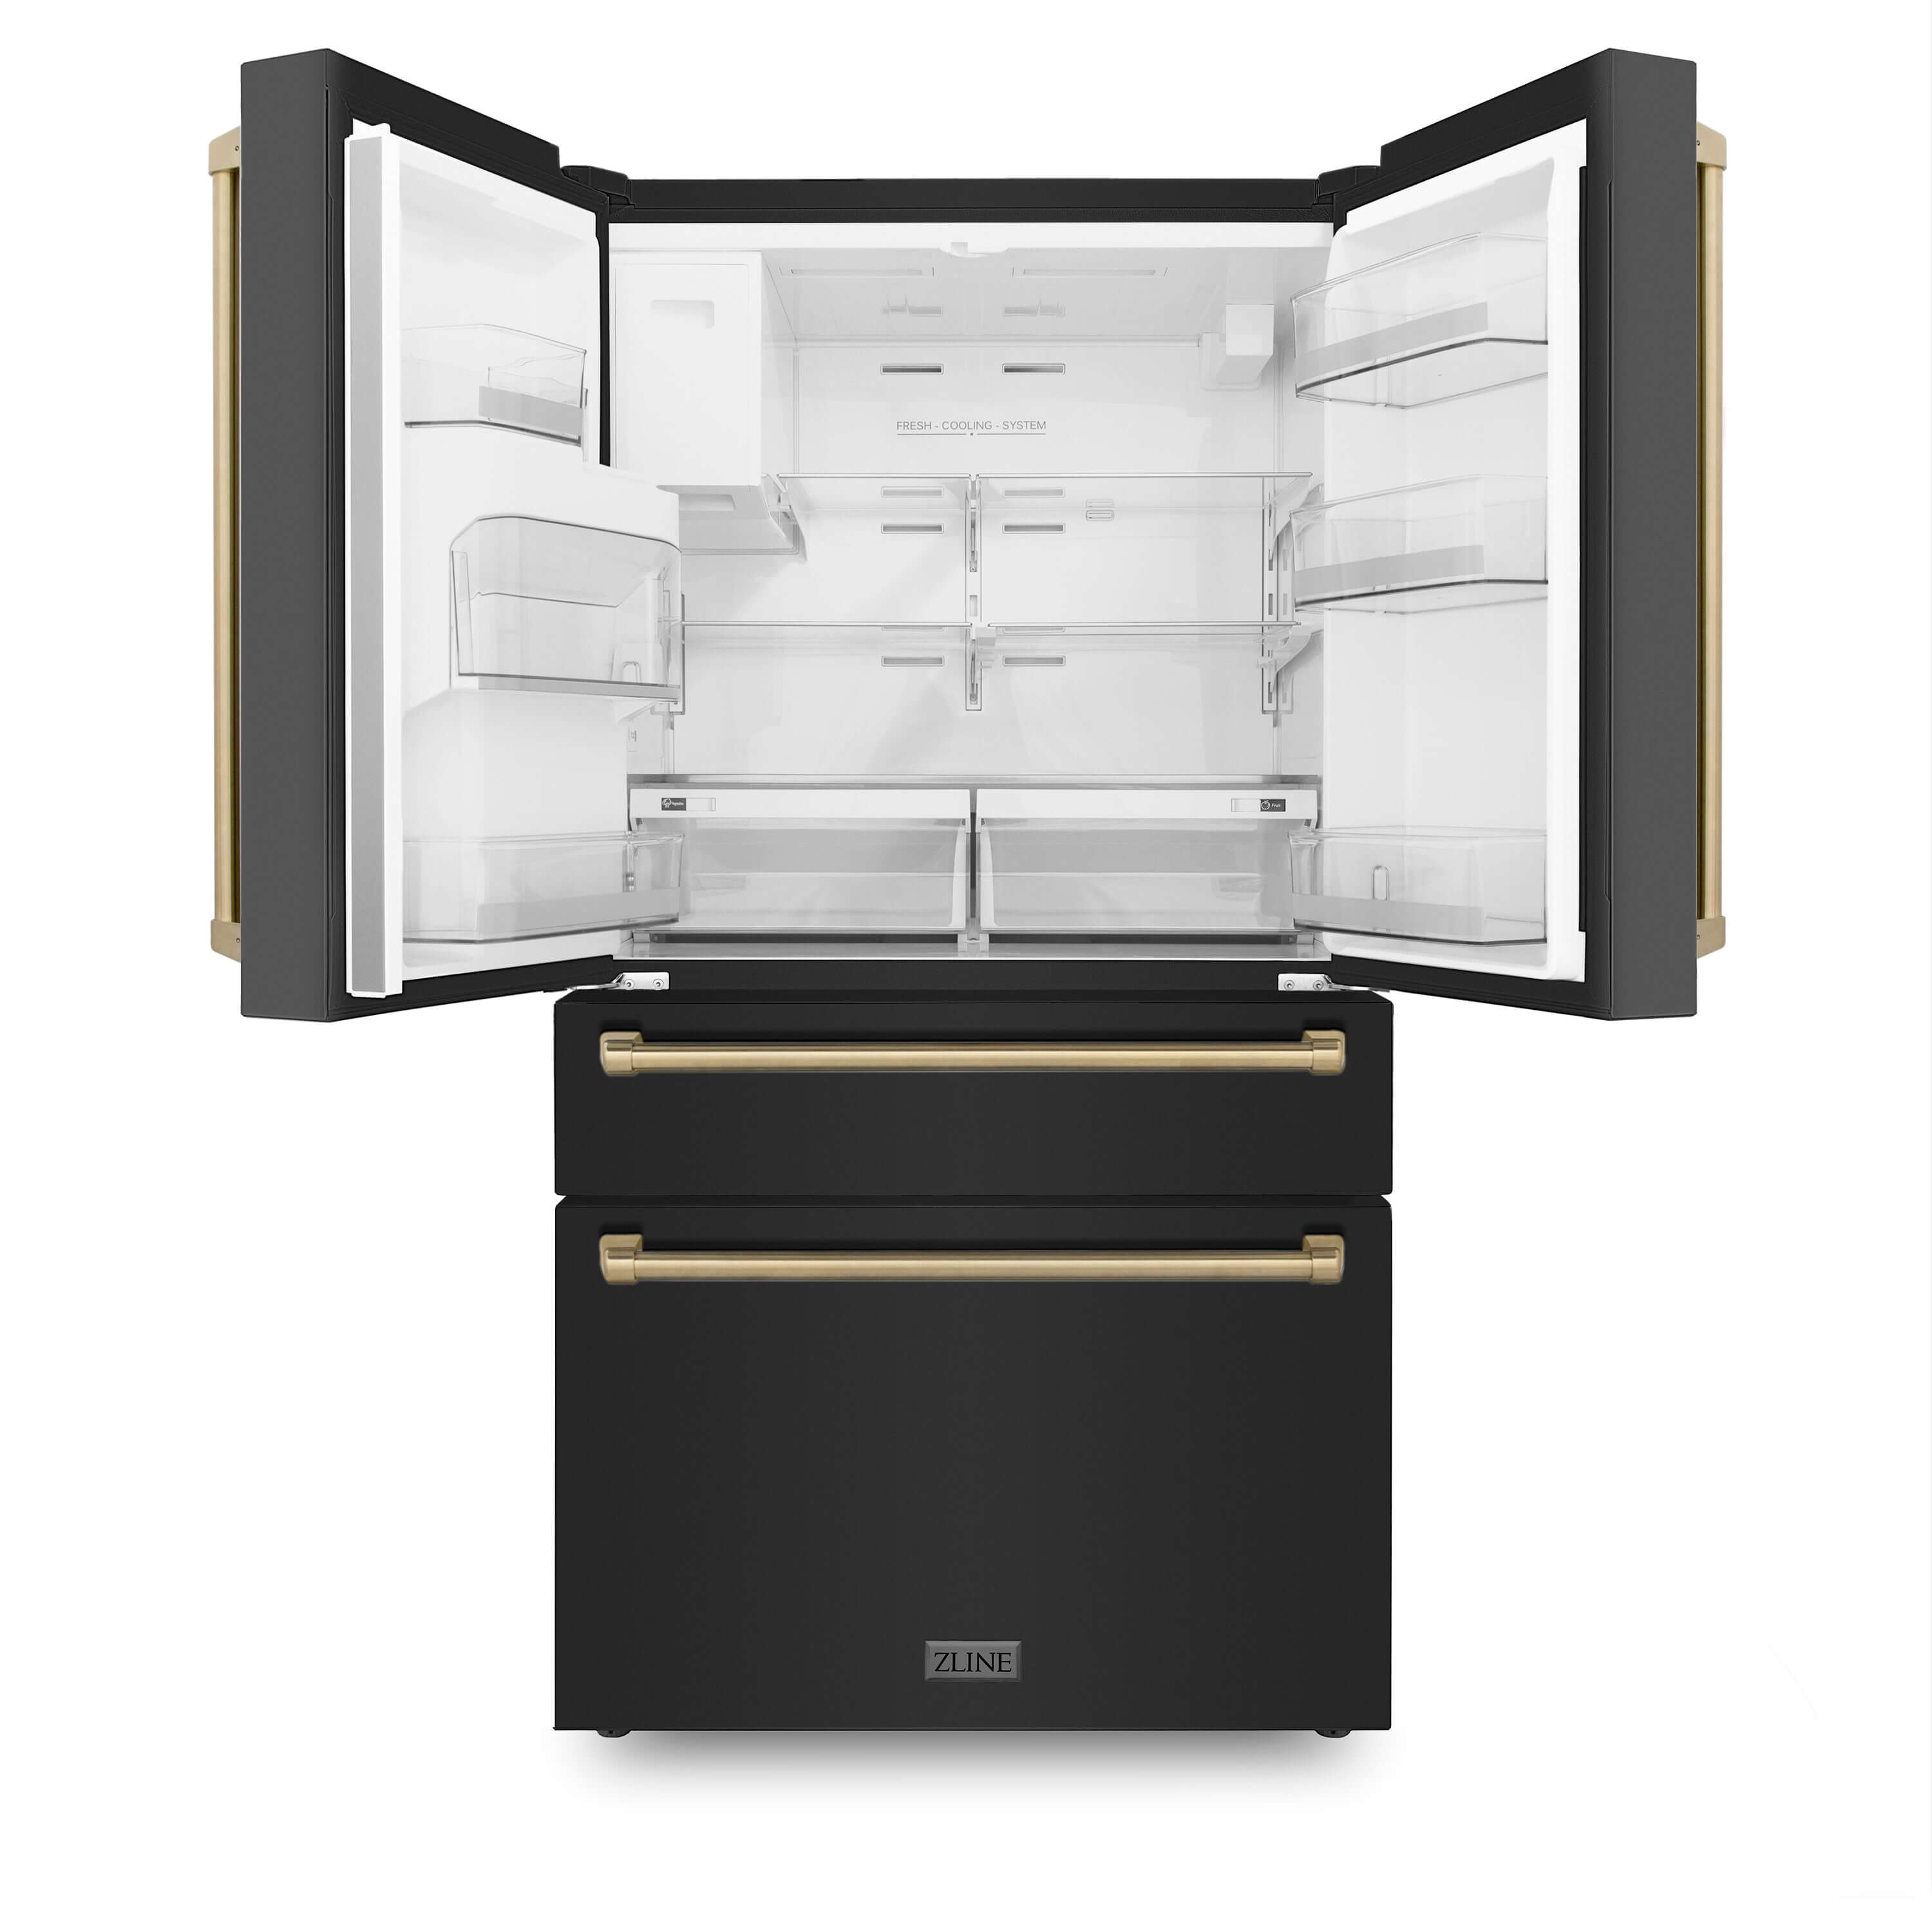 ZLINE 36 in. Autograph Edition French Door Refrigerator in Black Stainless Steel with Champagne Bronze Accents (RFMZ-W-36-BS-CB) front with doors open.